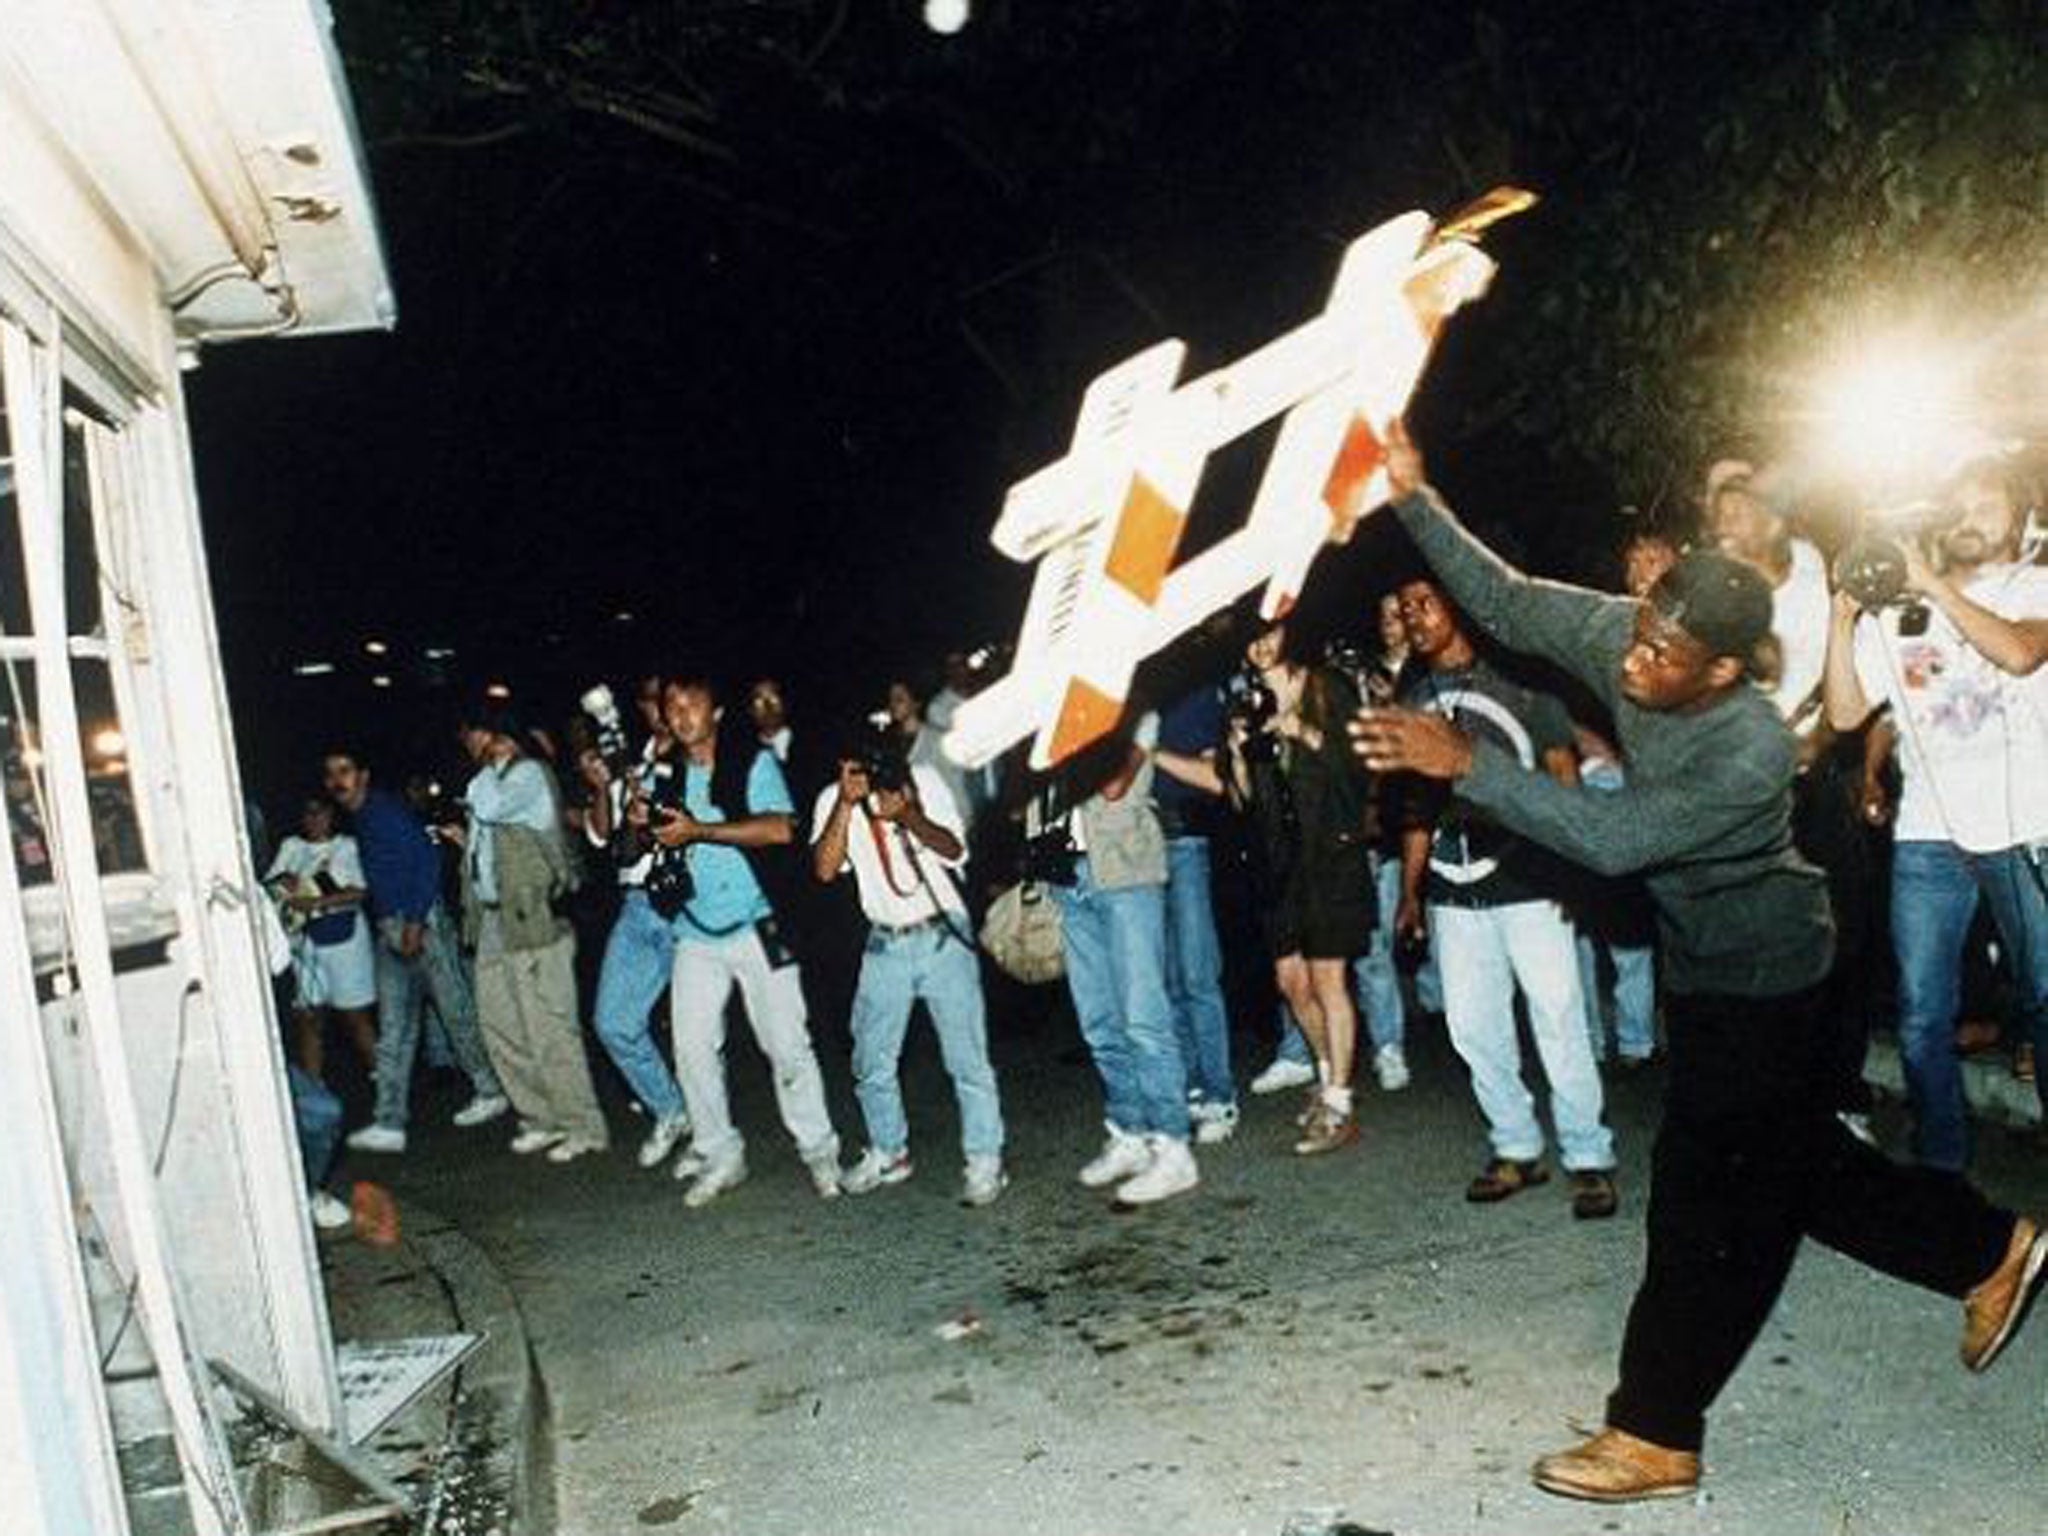 Days of mayhem: Los Angeles erupted into violence in the wake of the police attack on Rodney King in 1992